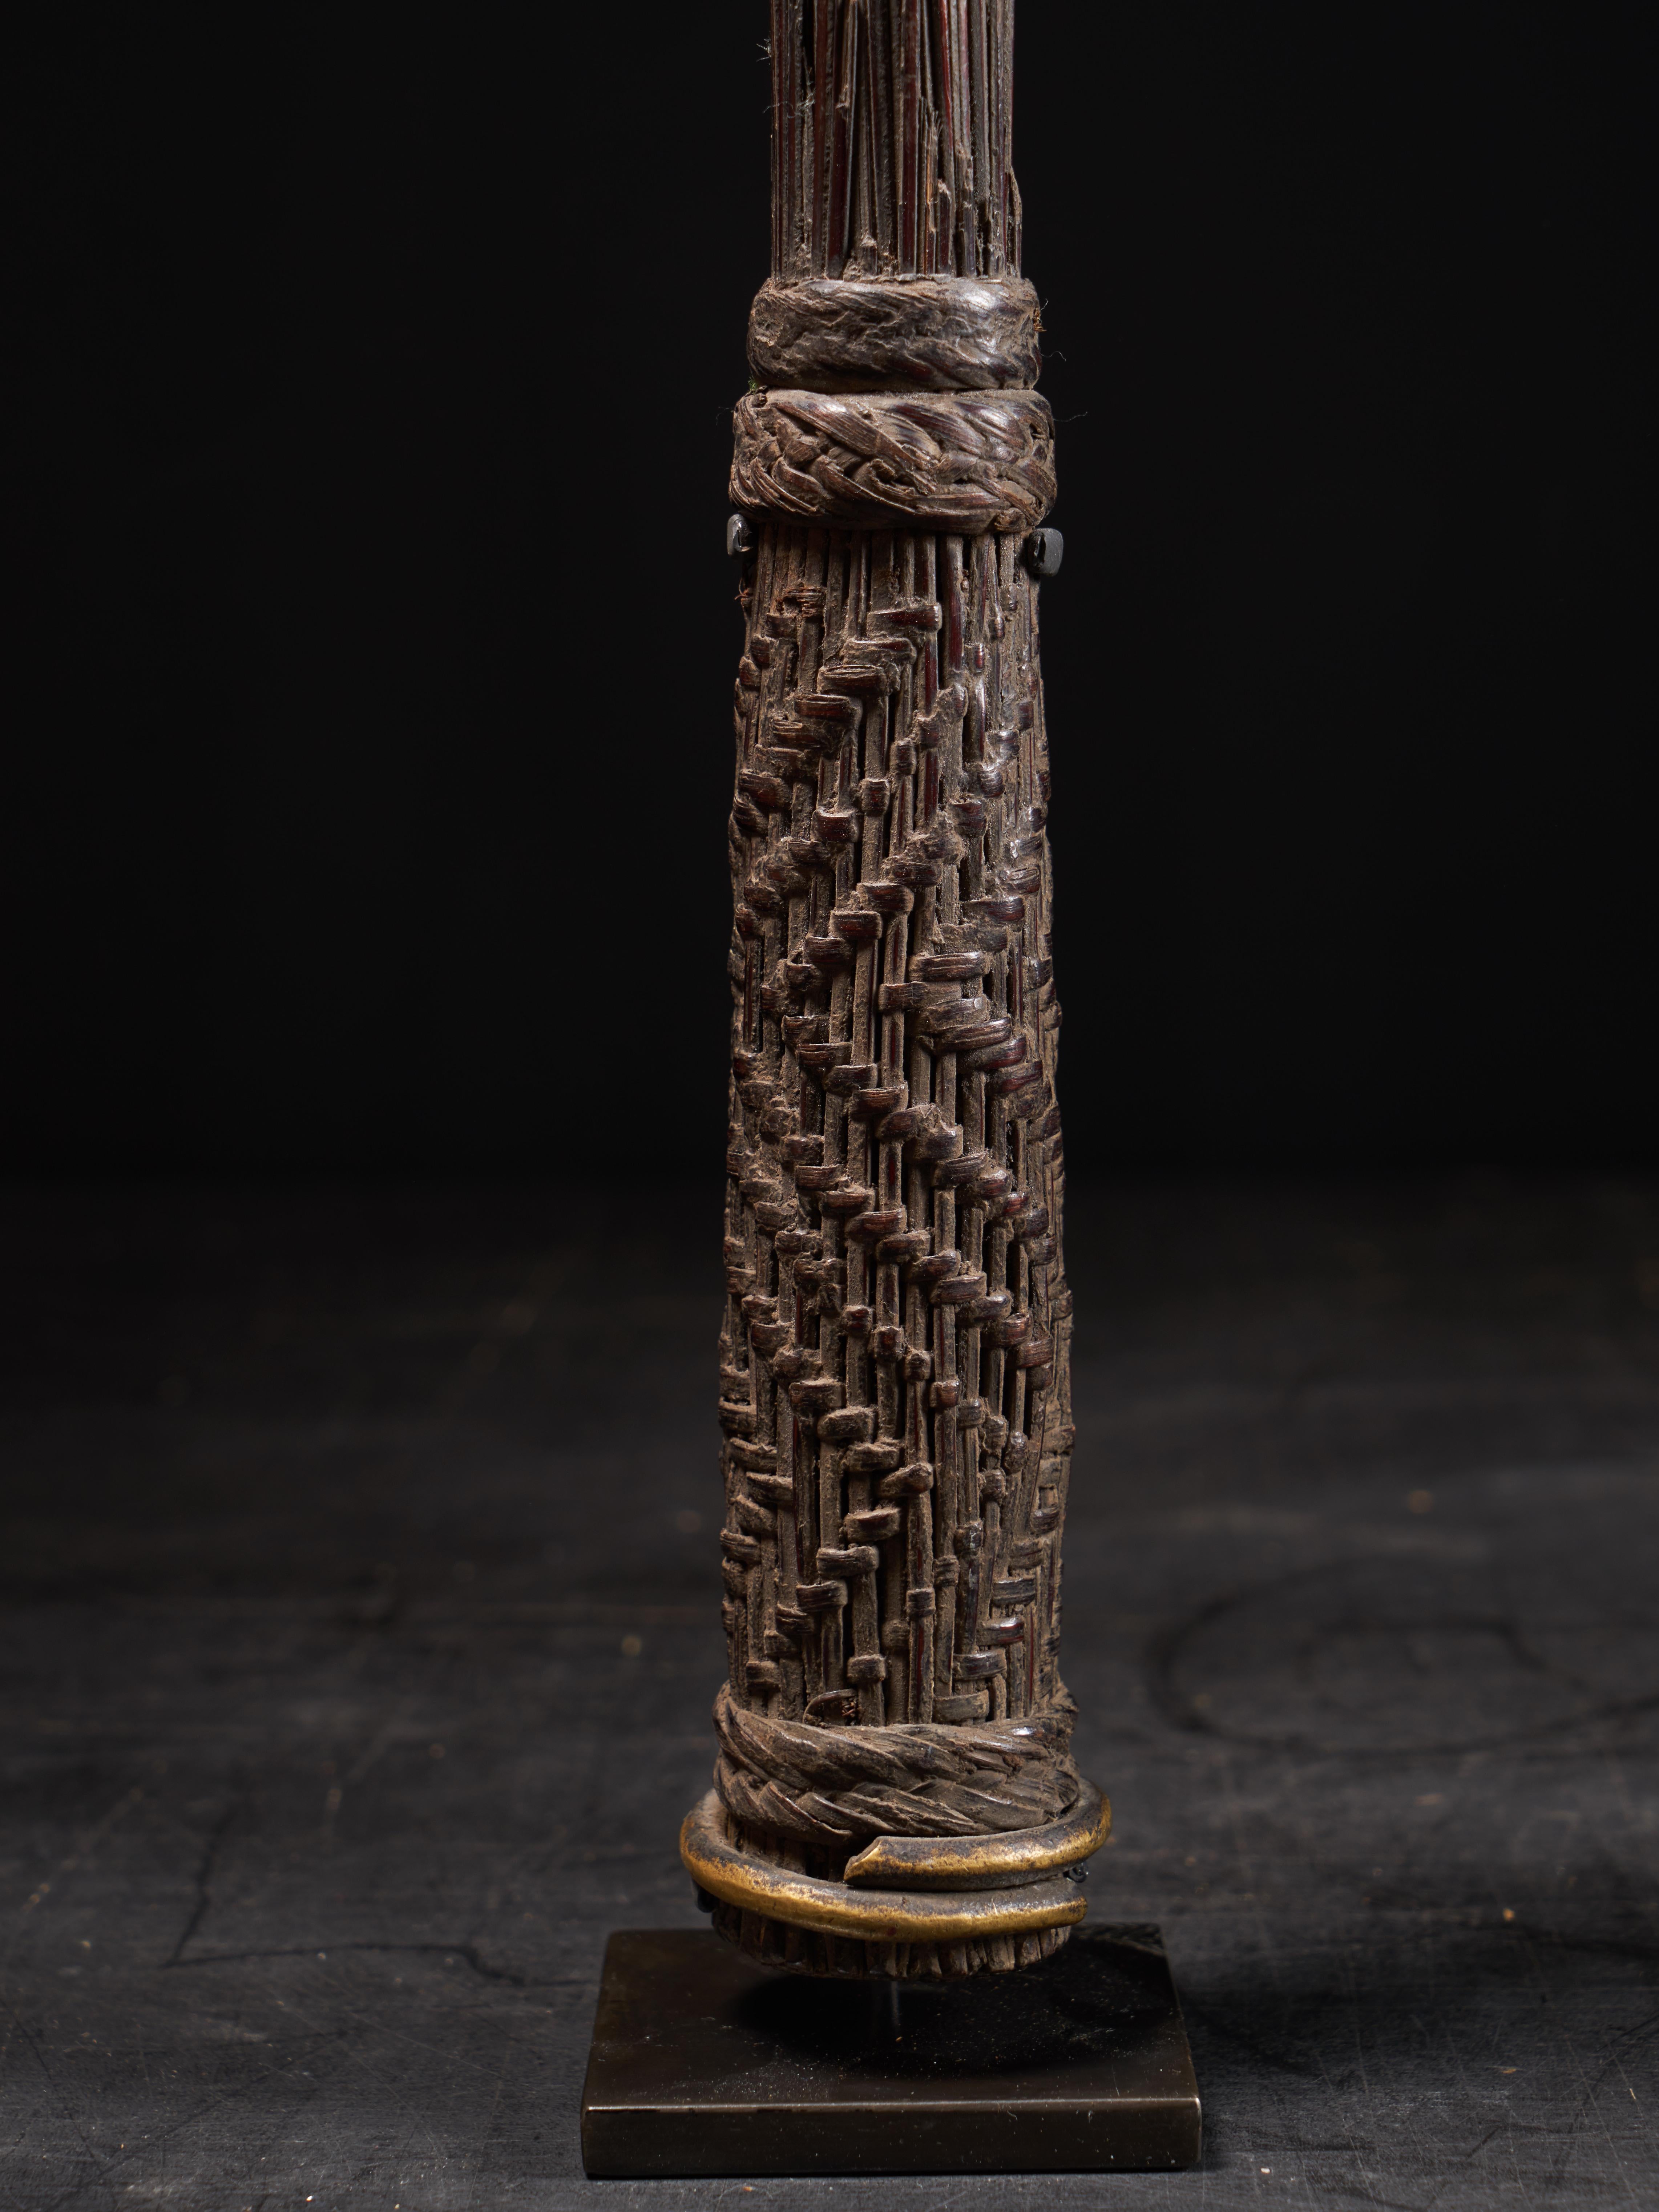 The Sceptres are made of the Midrib of Palm tree leaves. They were uses by the members of the Lilwaa Secret Society of the Mbole Tribe that live in the South -Western part of Kongo. The finishing are very minimalistic and refined.